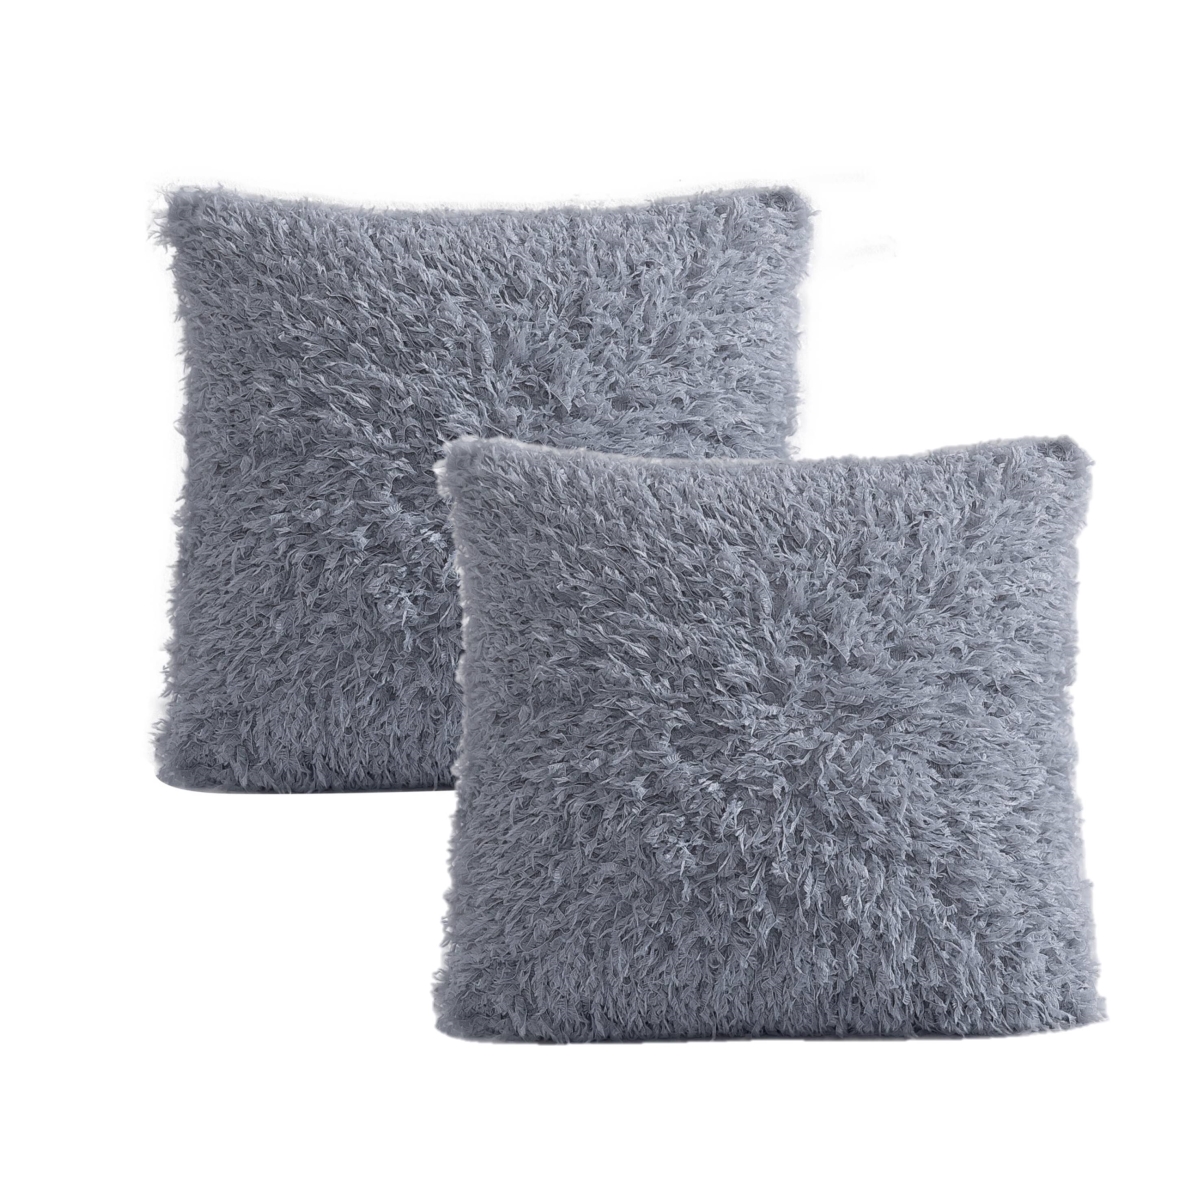 Fep-181-gre Feather Faux Fur Pillow Cover, Grey - Set Of 2